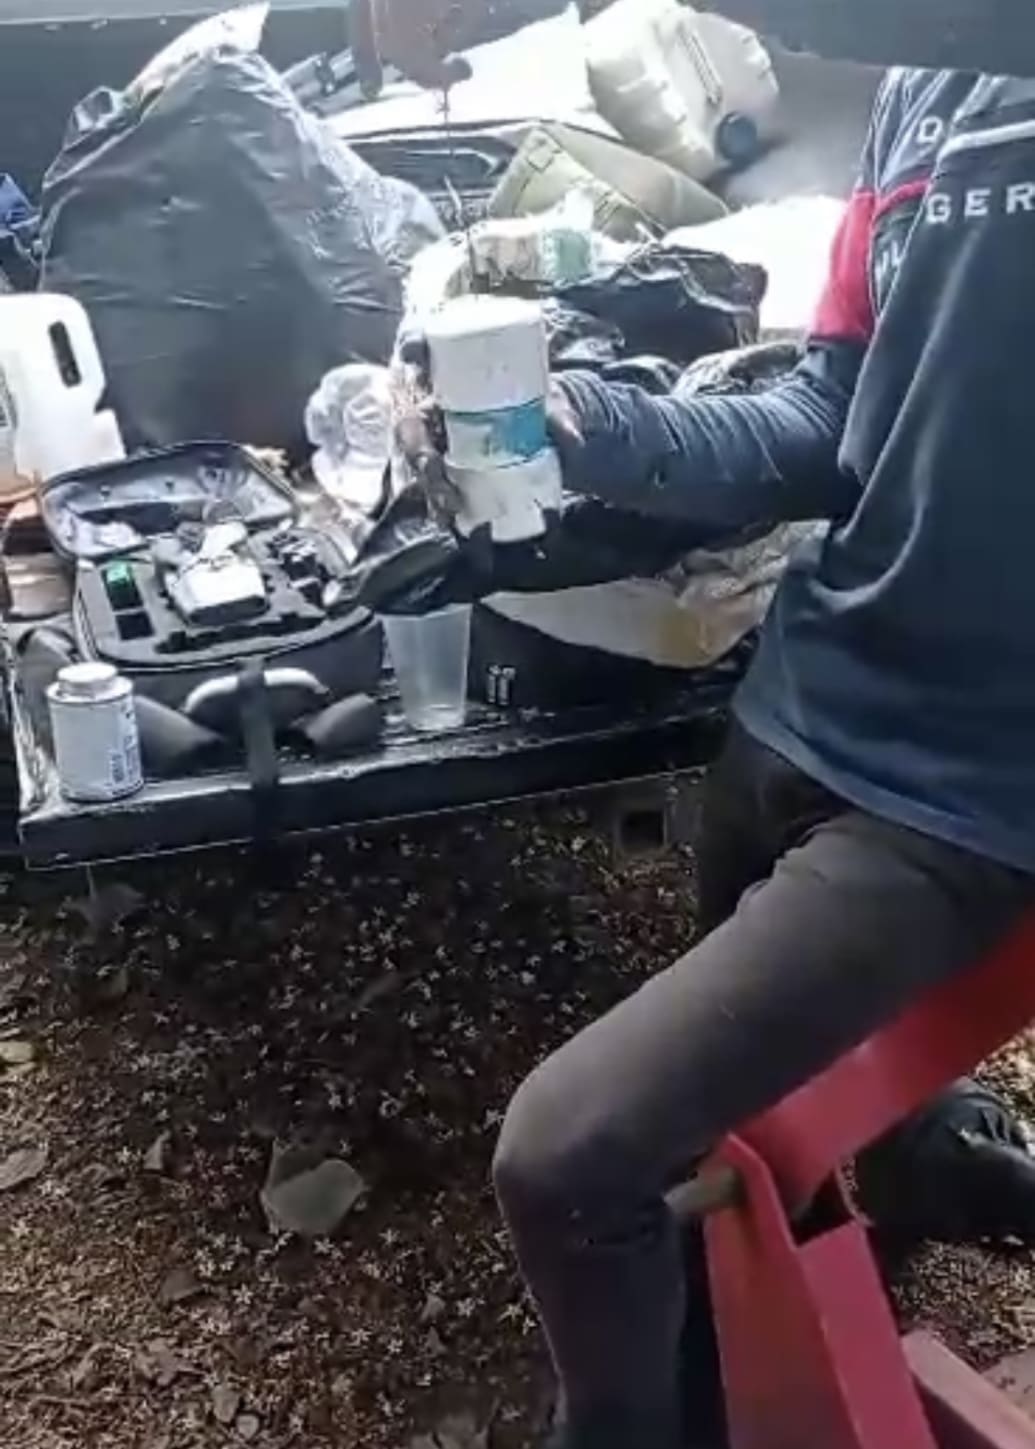 A screenshot from a video shared by a Jalisco New Generation Cartel member while preparing an explosive load.